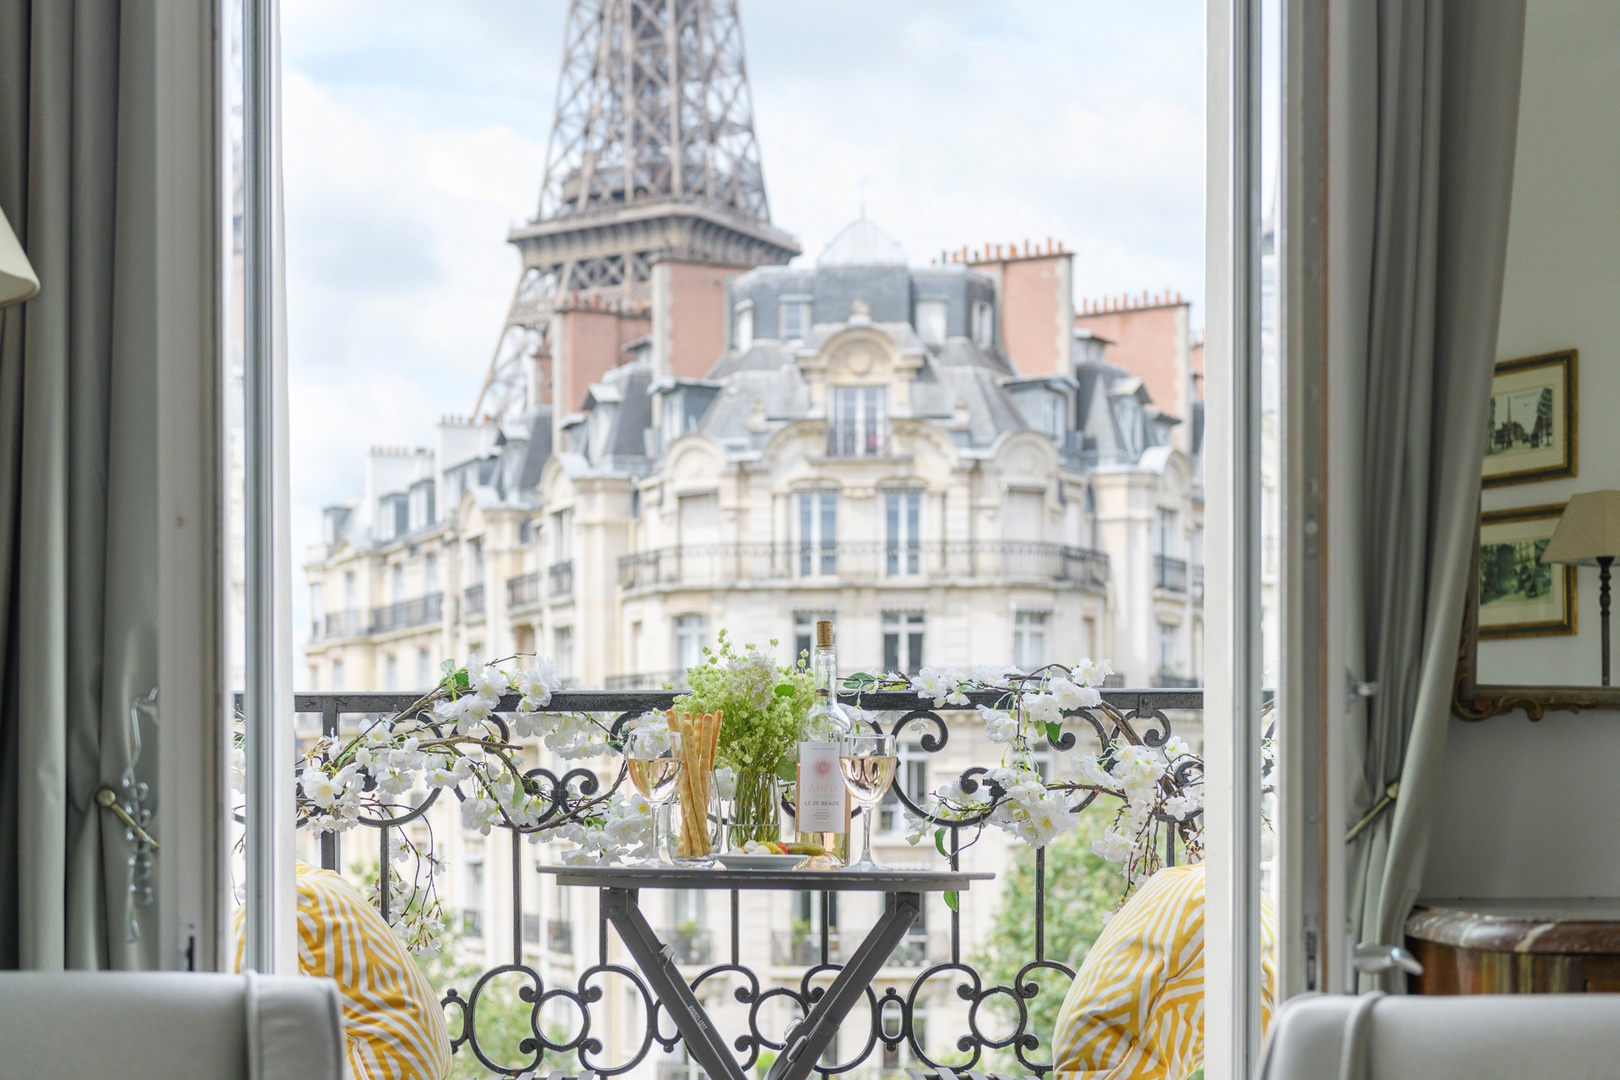 You'll never grow tired of this incredible Eiffel view!